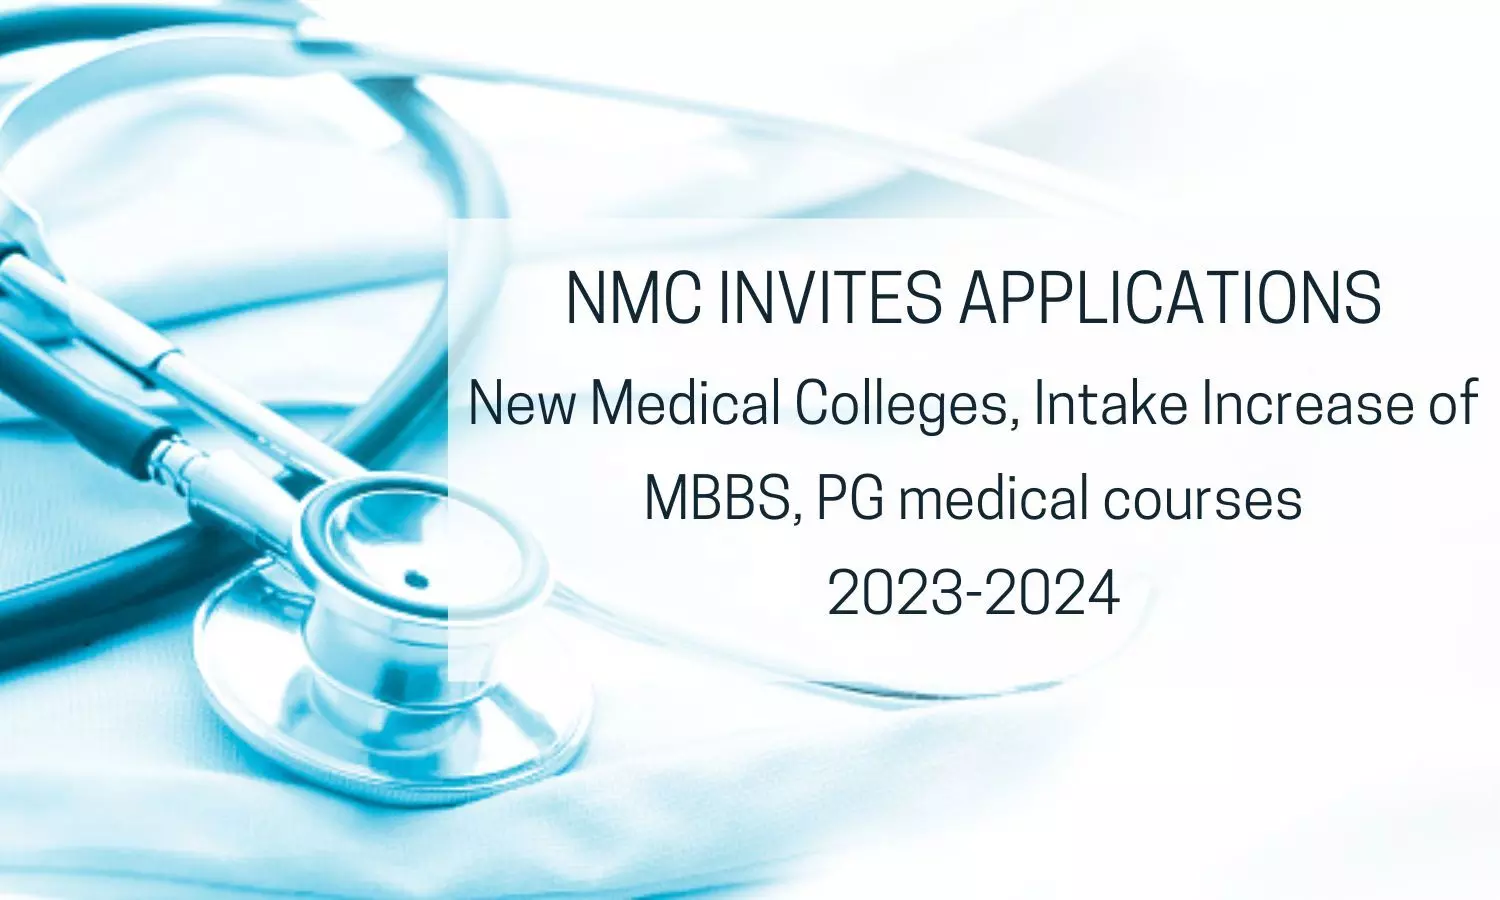 NMC re-invites applications for Establishment of New Medical Colleges, Intake Increase Of MBBS, PG Medical Seats, Starting New PG courses